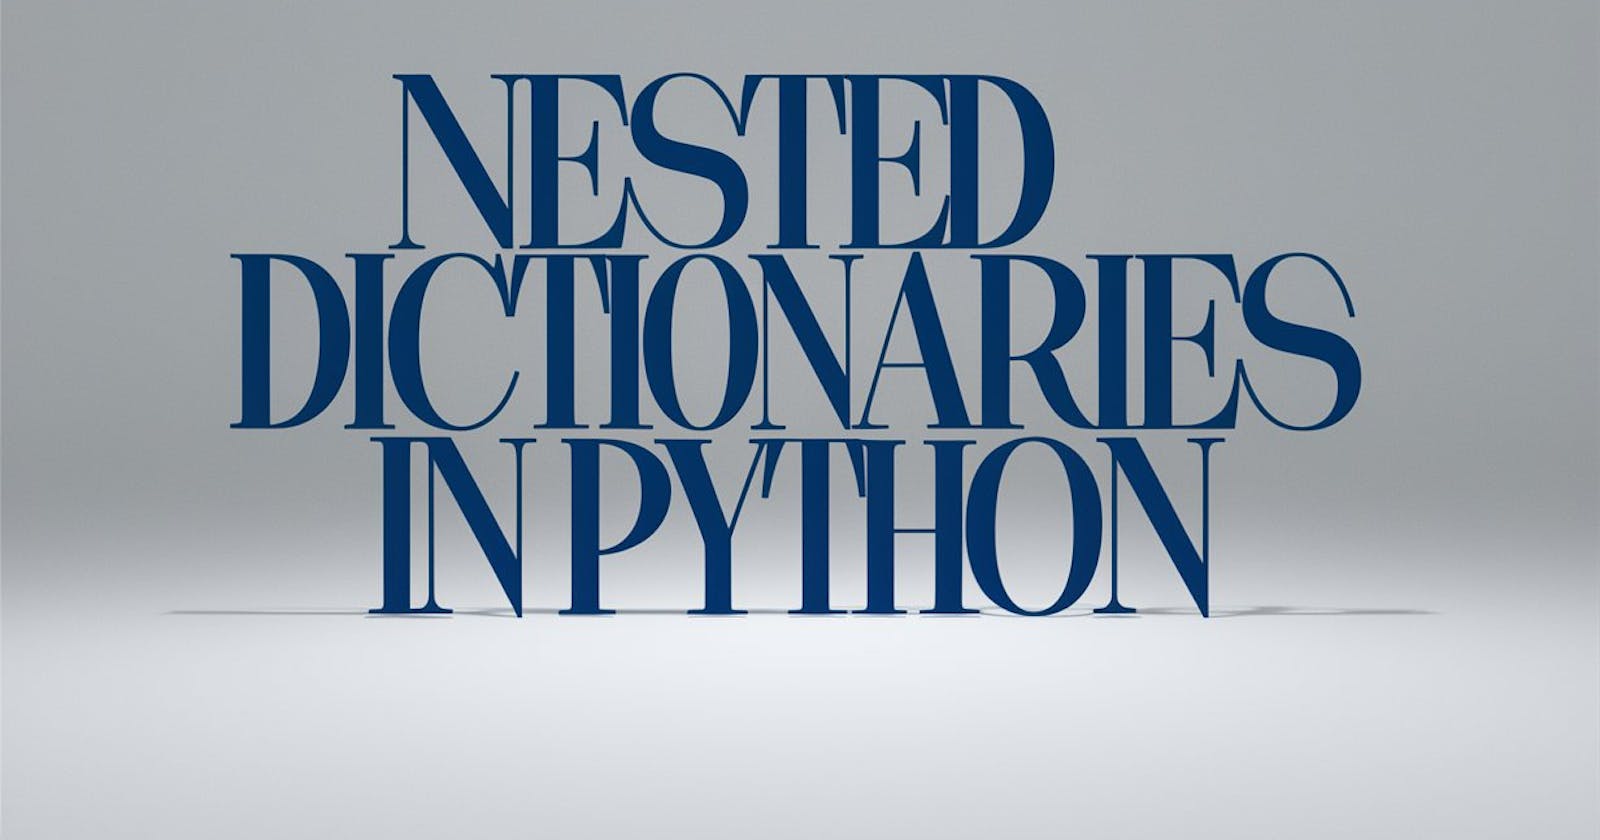 A Guide to Nested Dictionaries in Python with Five Examples